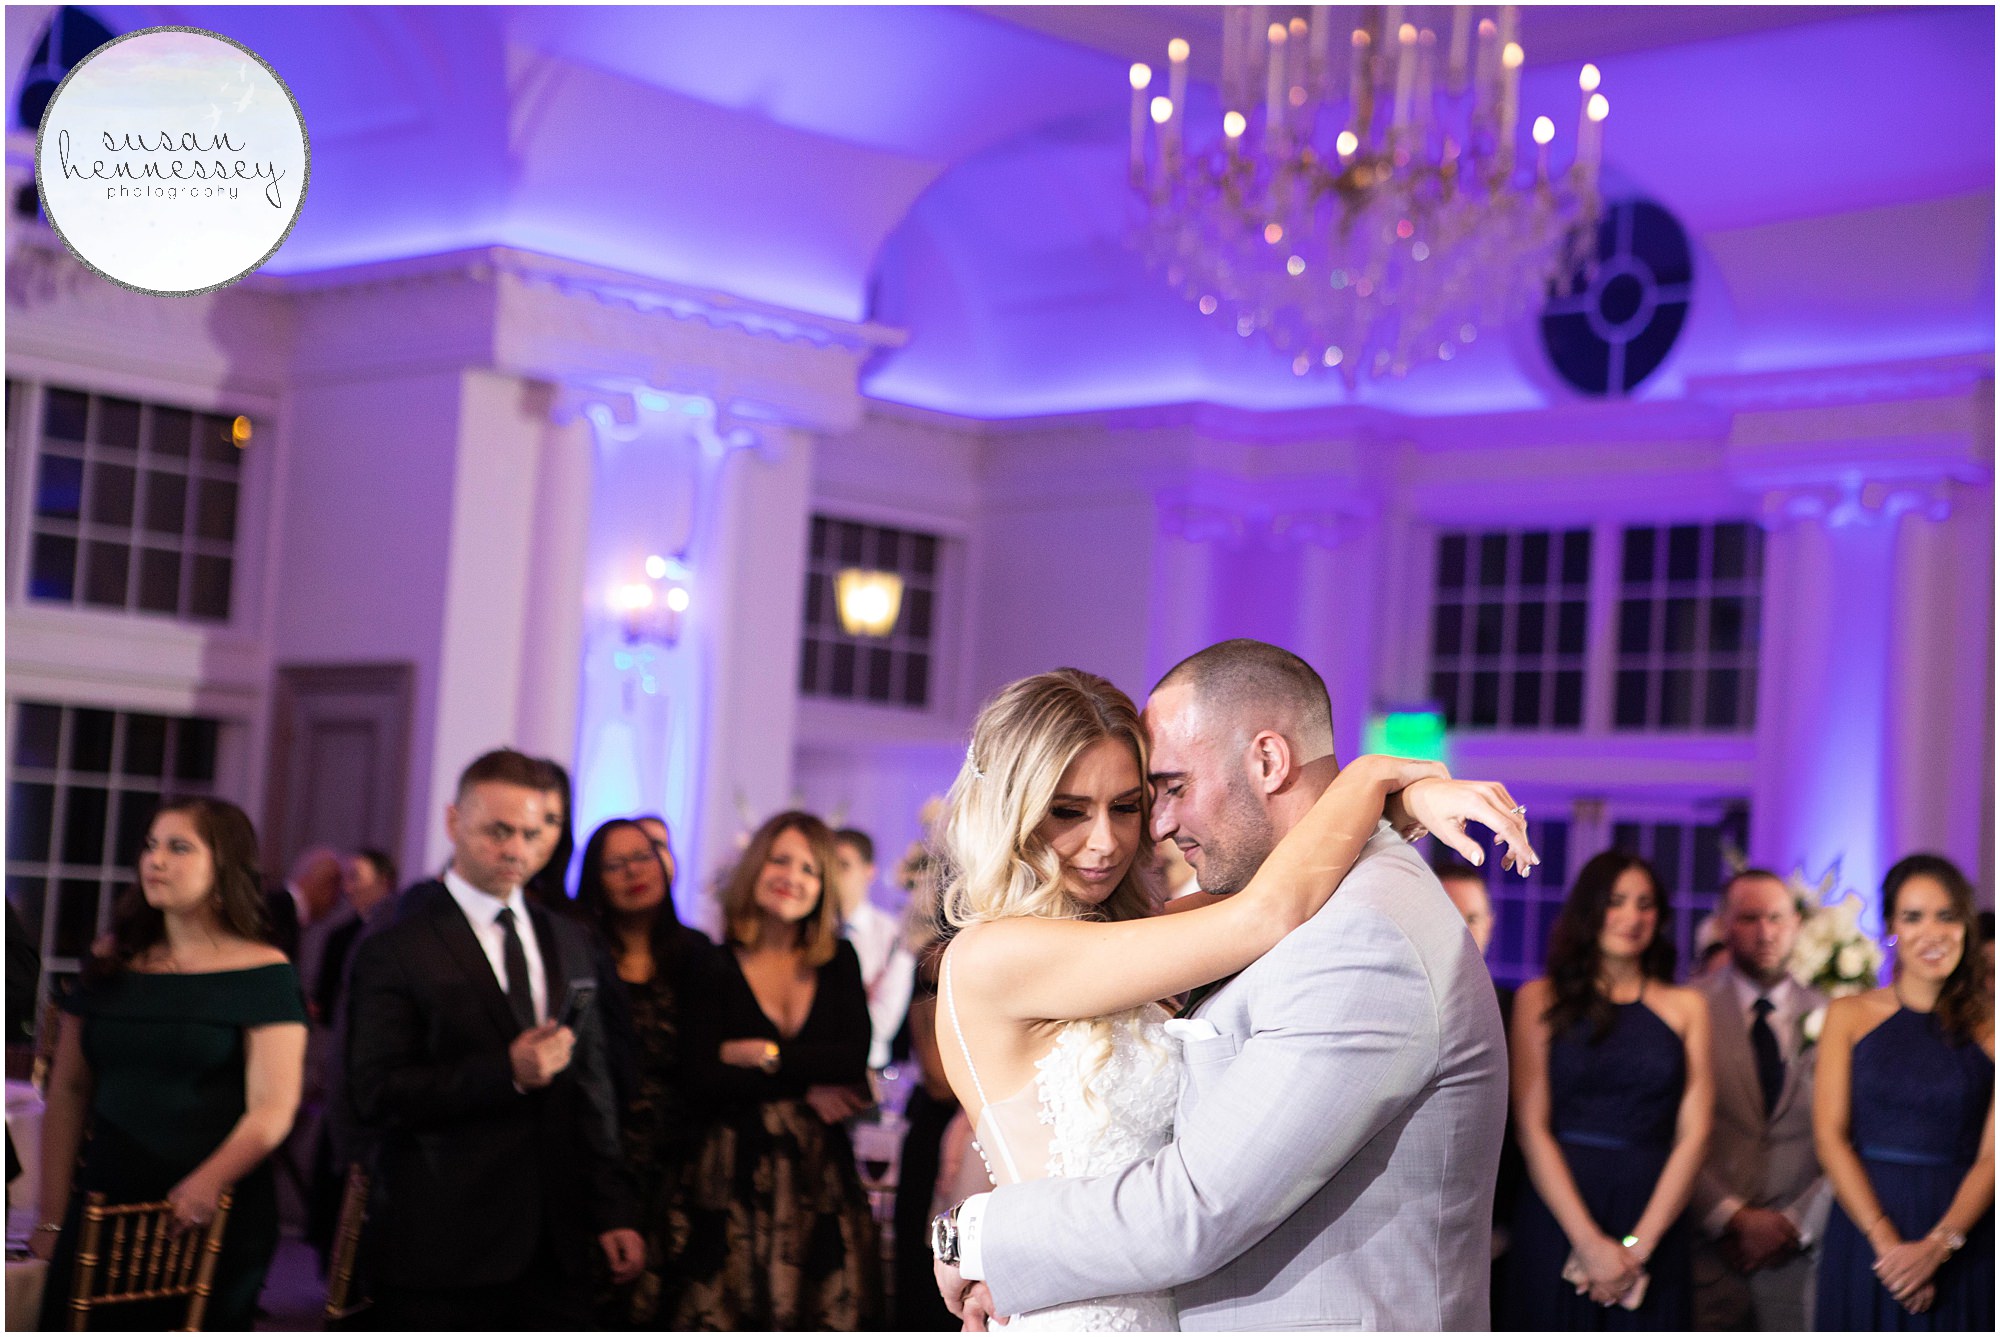 First dance for bride and groom at their elegant winter wedding